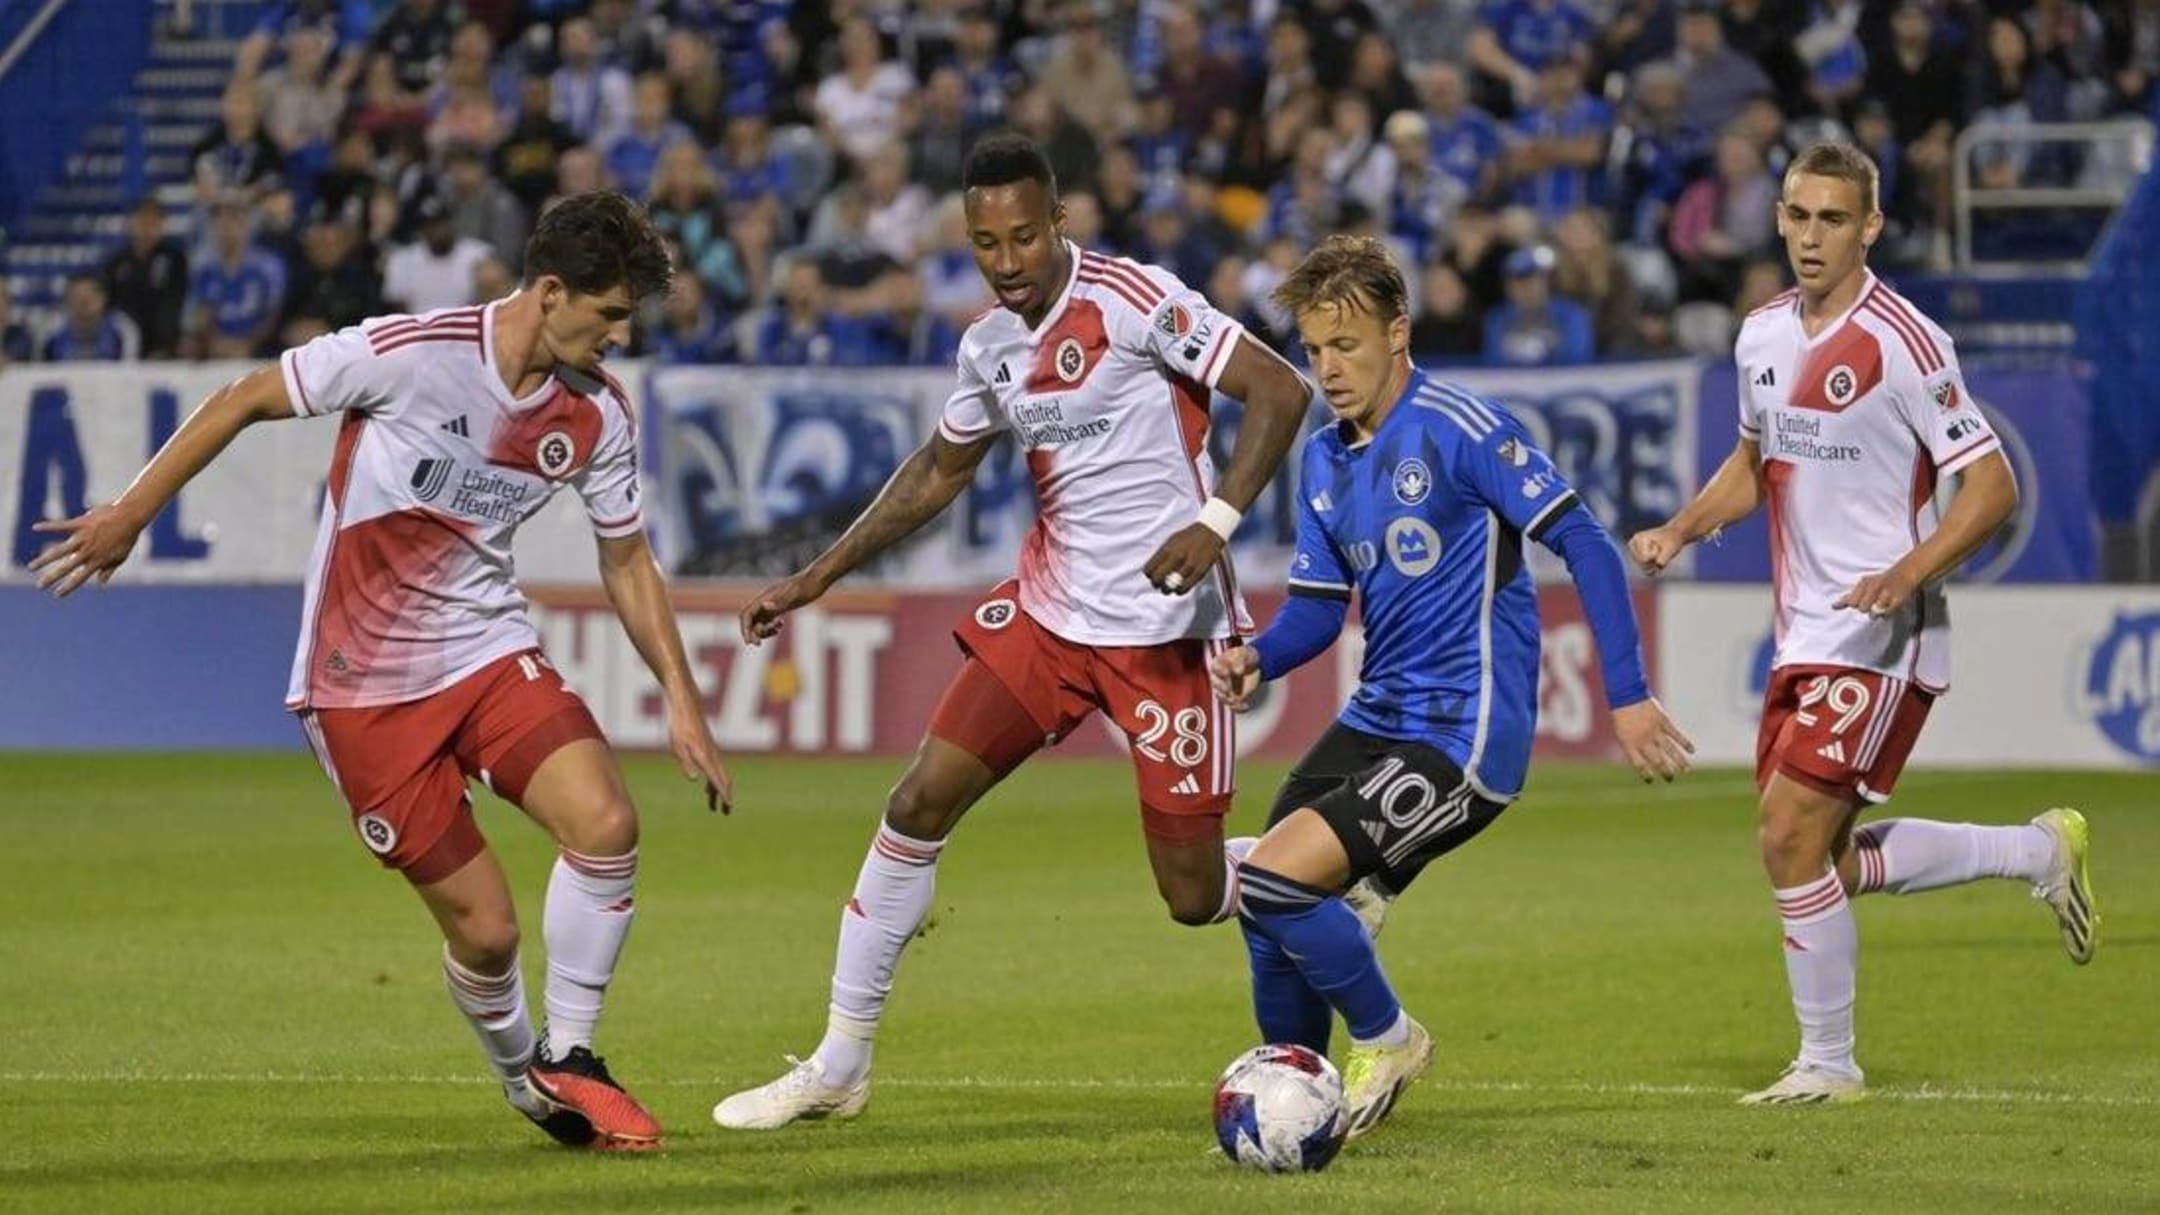 Campbell's late goal sends Montreal past Revolution 1-0